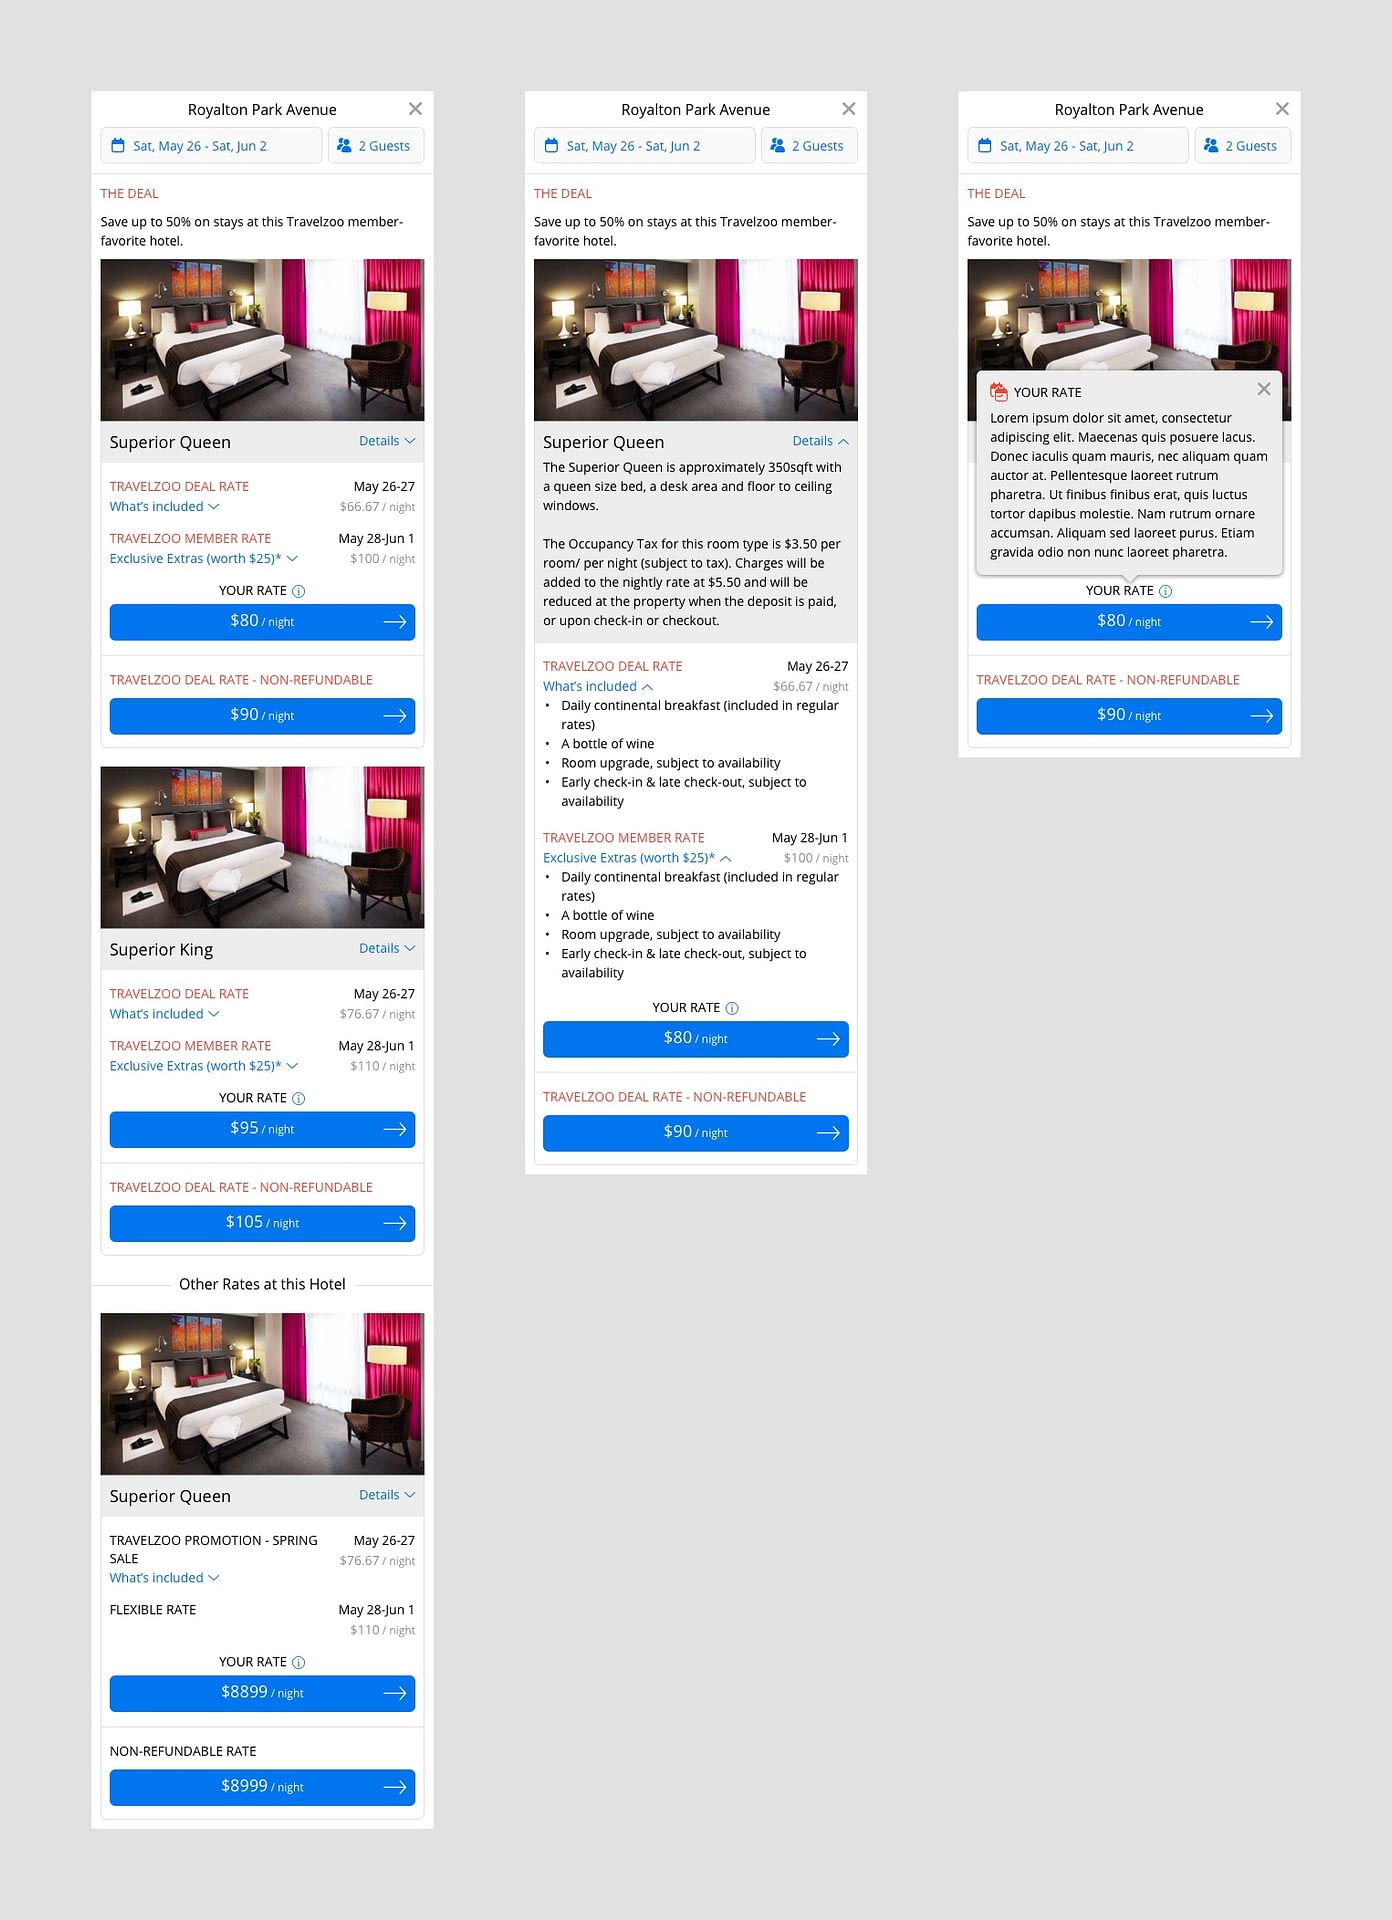 Hotel rooms-and-rates UI design (final) mobile web